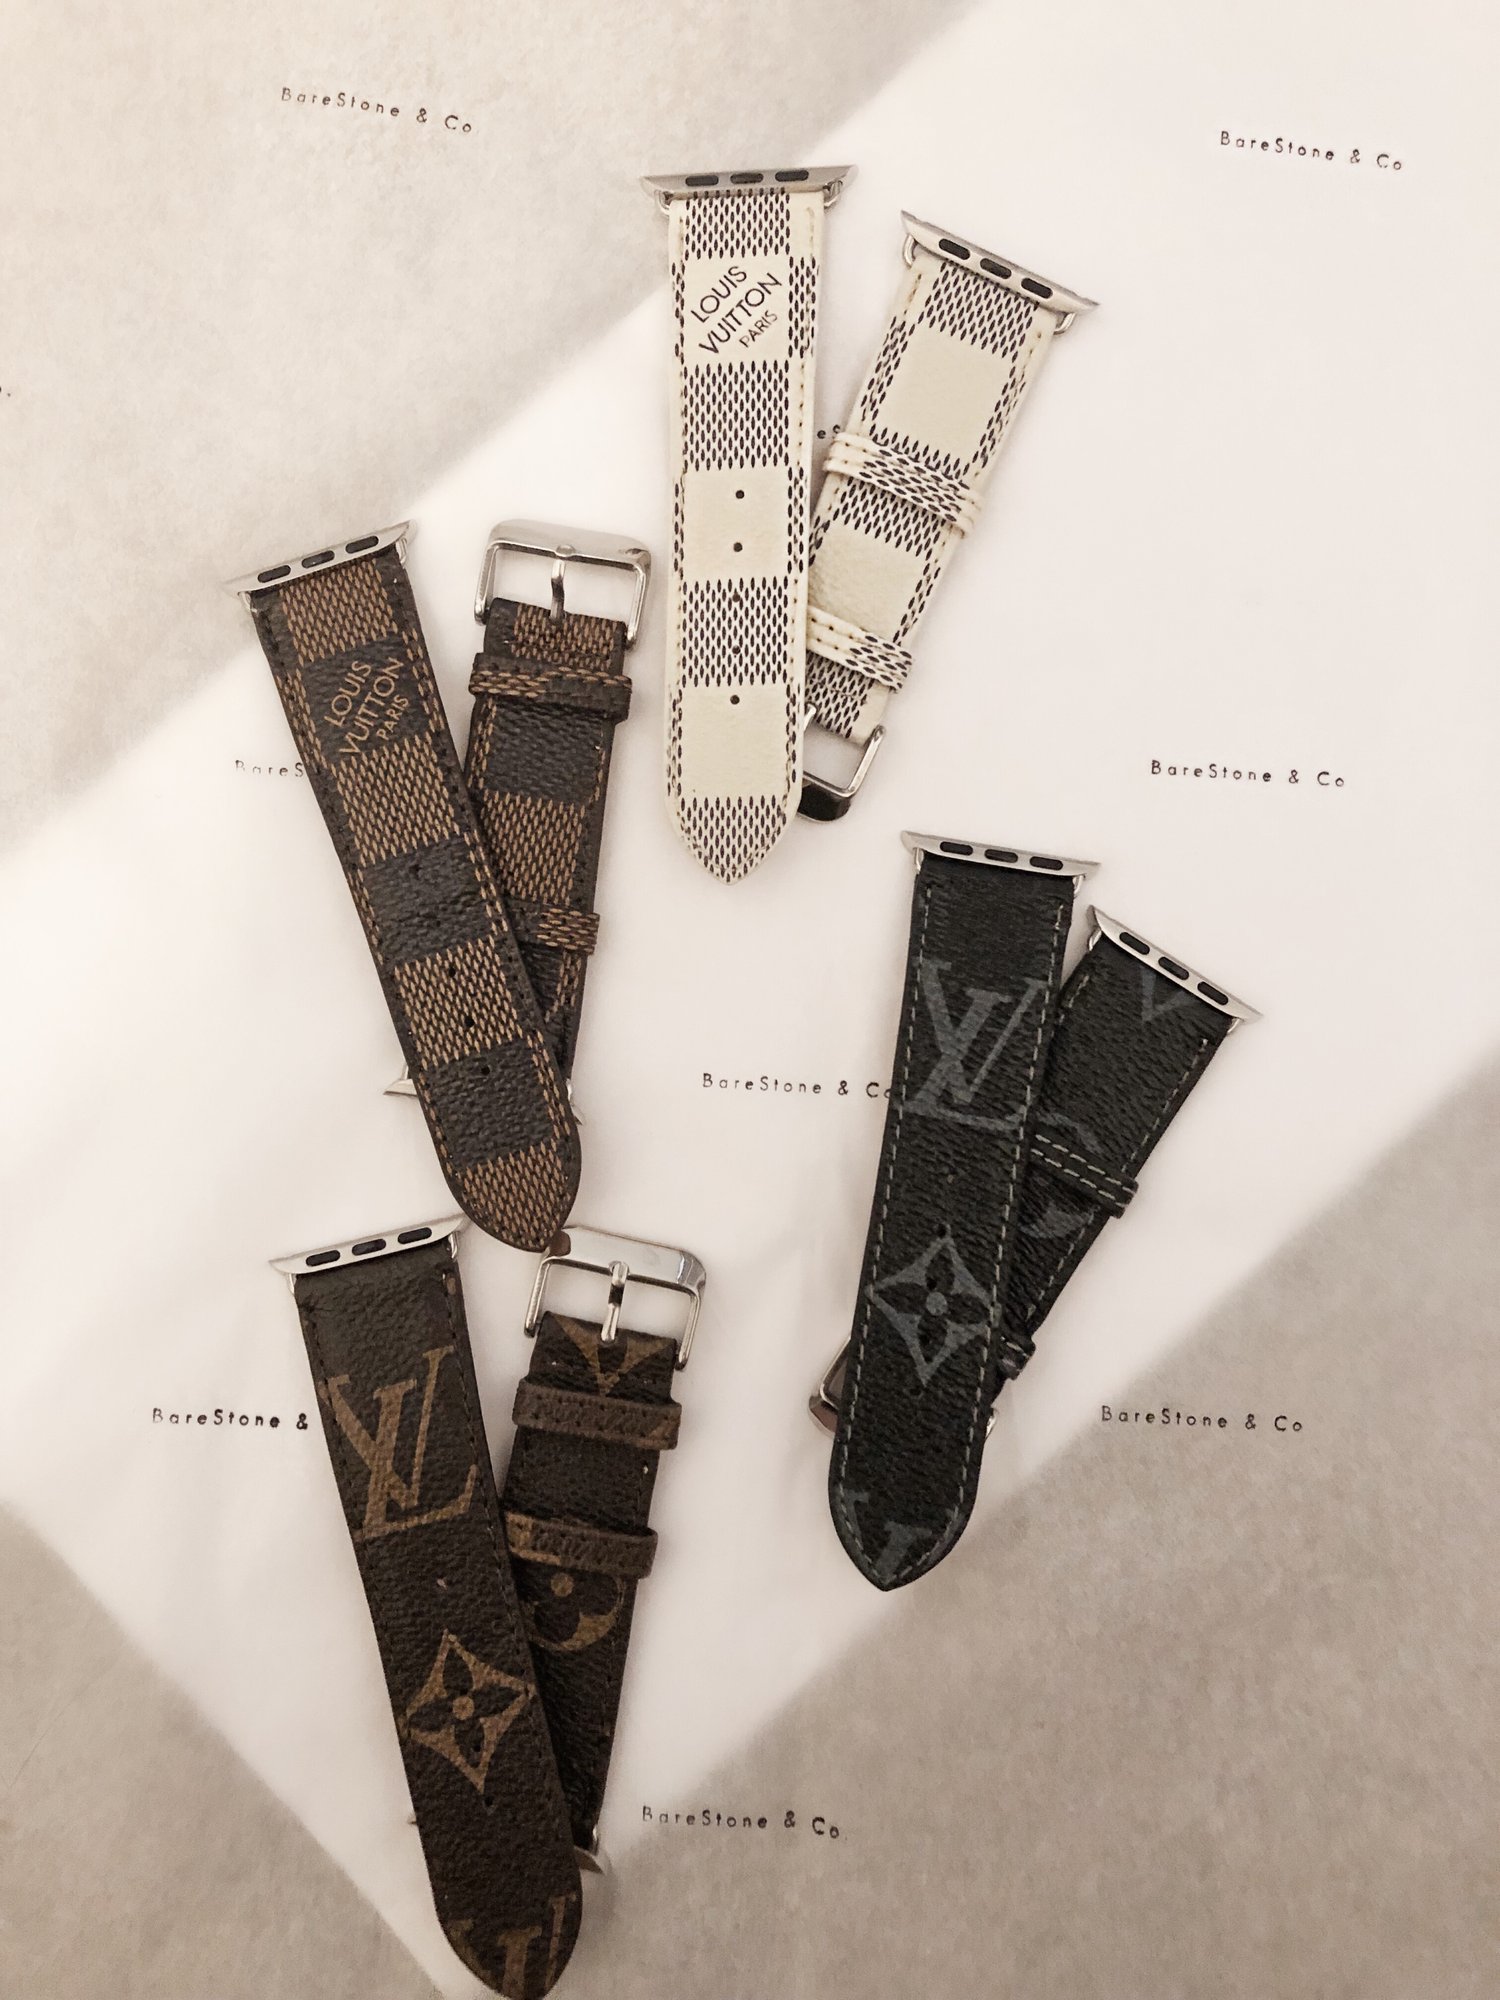 lv watch band 38mm